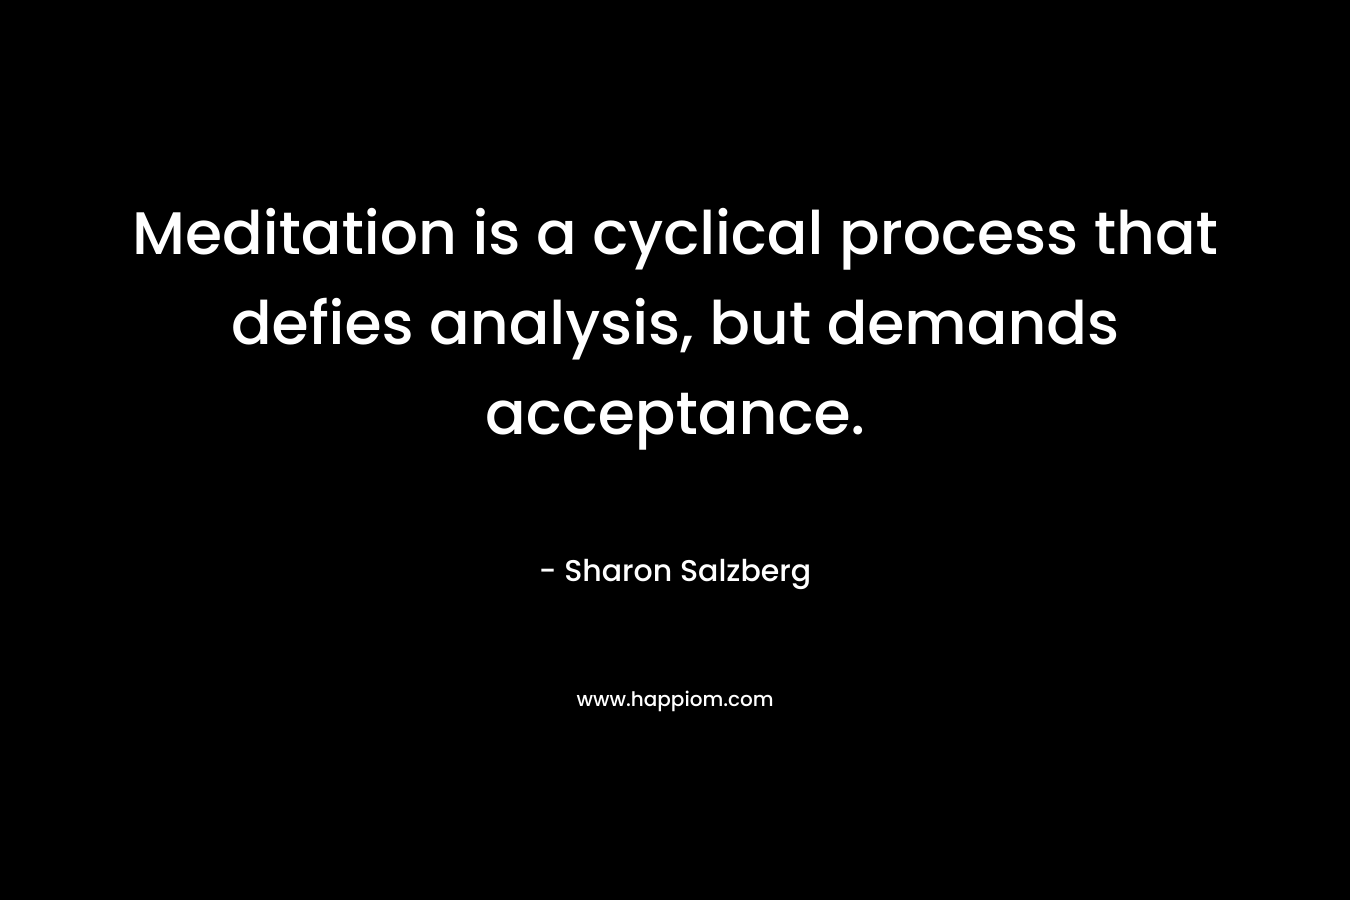 Meditation is a cyclical process that defies analysis, but demands acceptance.